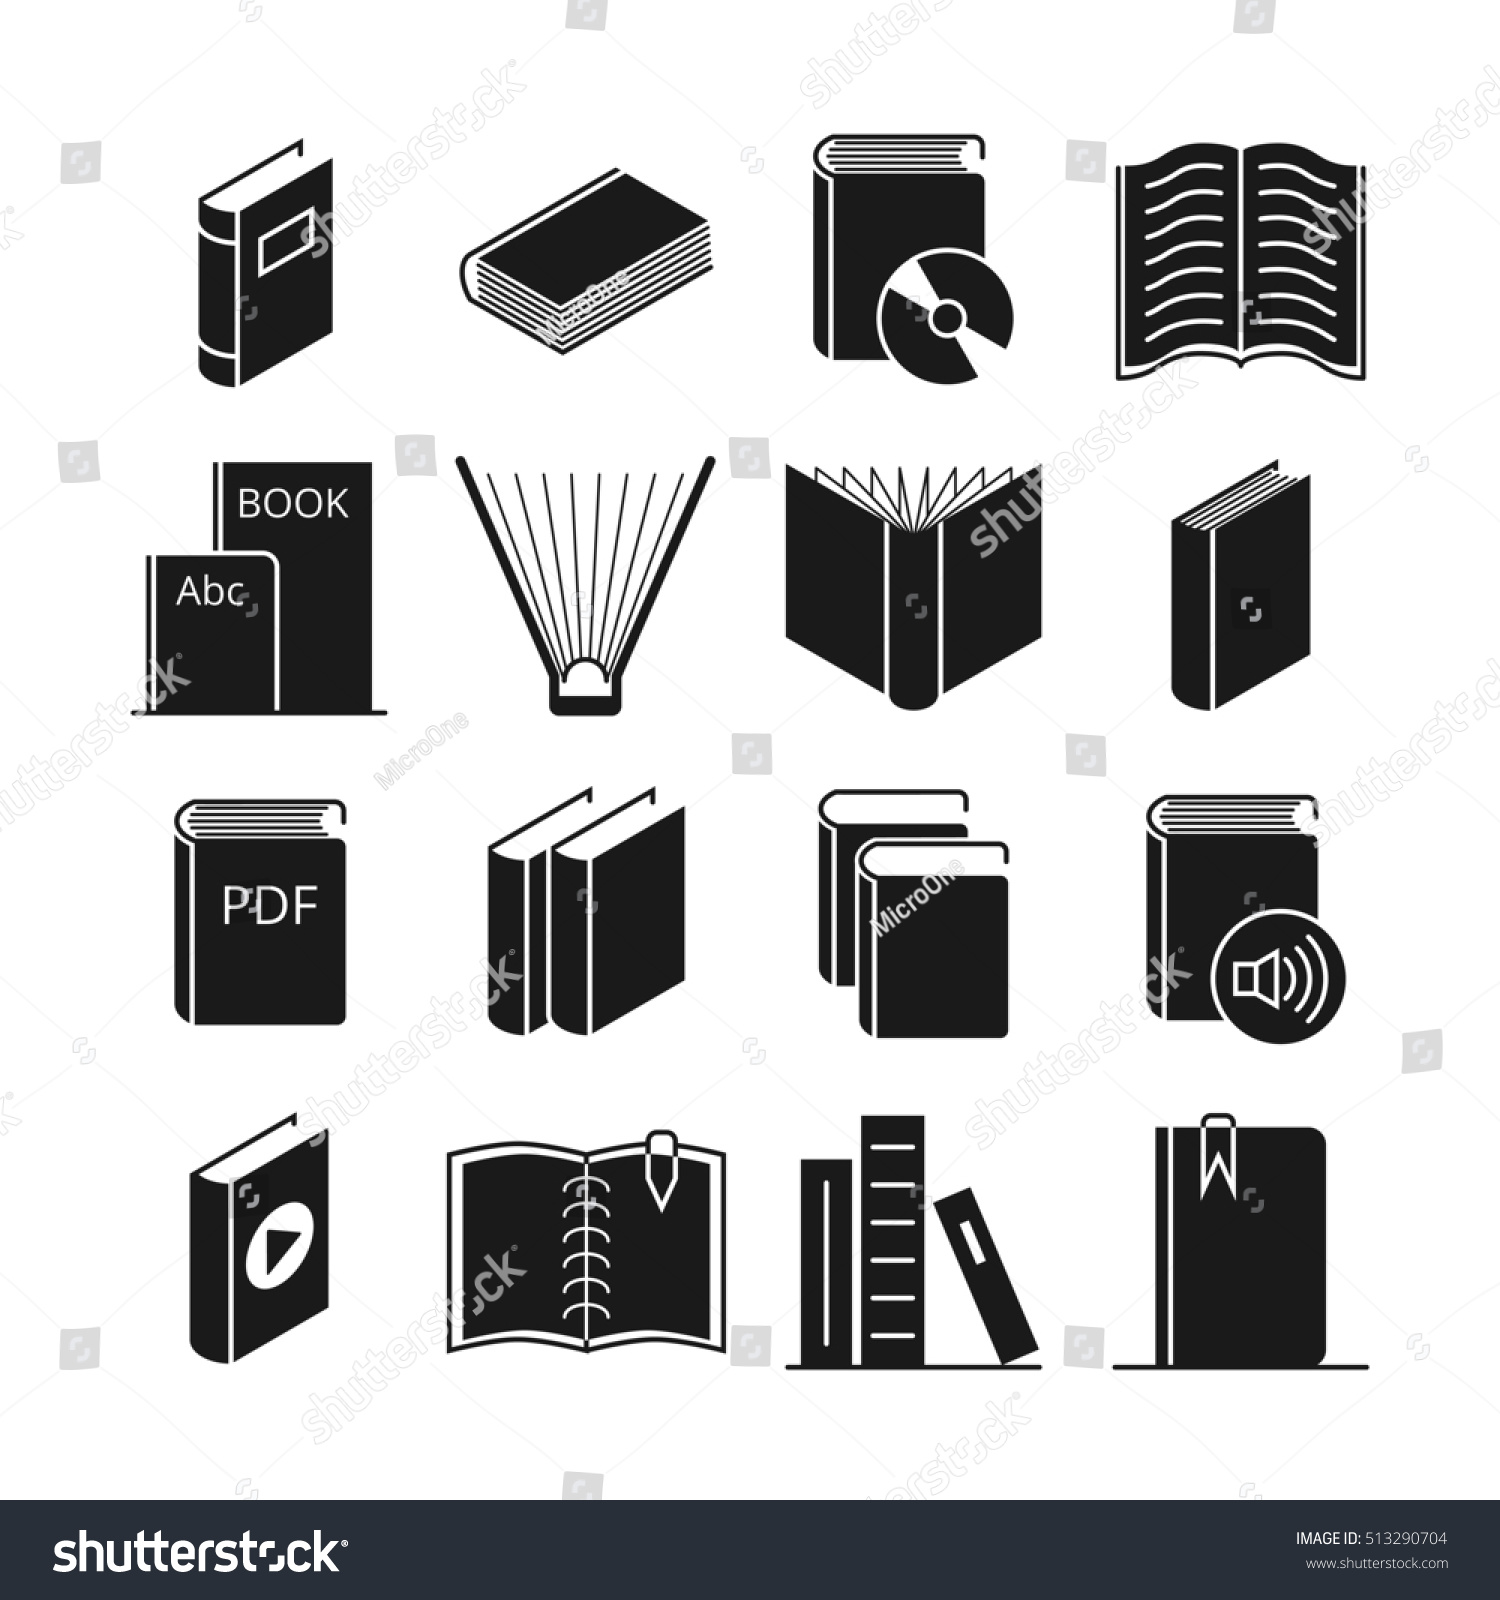 Book with pen - literature icon Royalty Free Vector Image